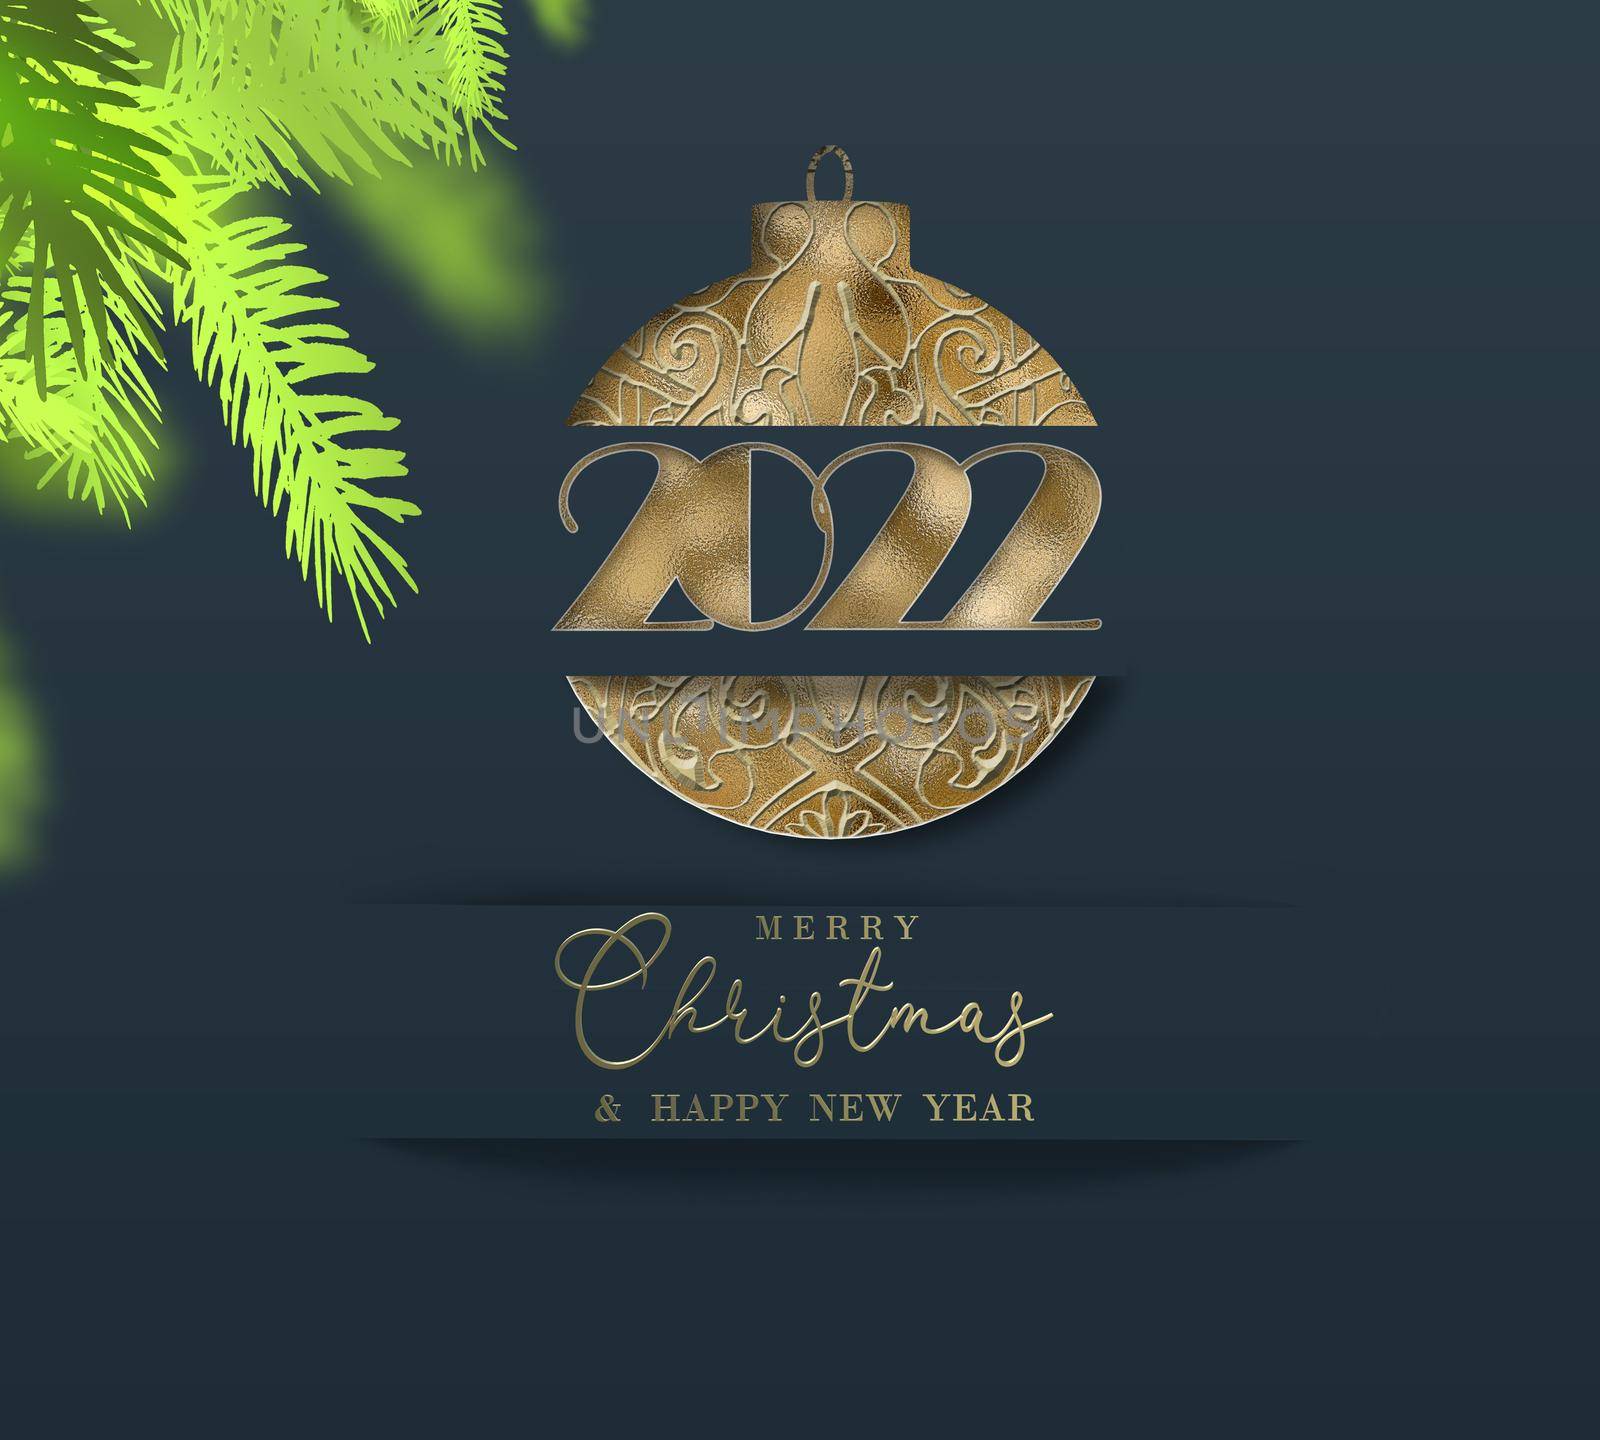 Christmas New Year 2022 greetings. Xmas pine. Gold ball bauble, gold digit 2022 over dark blue. Golden text Merry Christmas Happy New Year. Winter holiday corporate card. Greeting card. Illustration